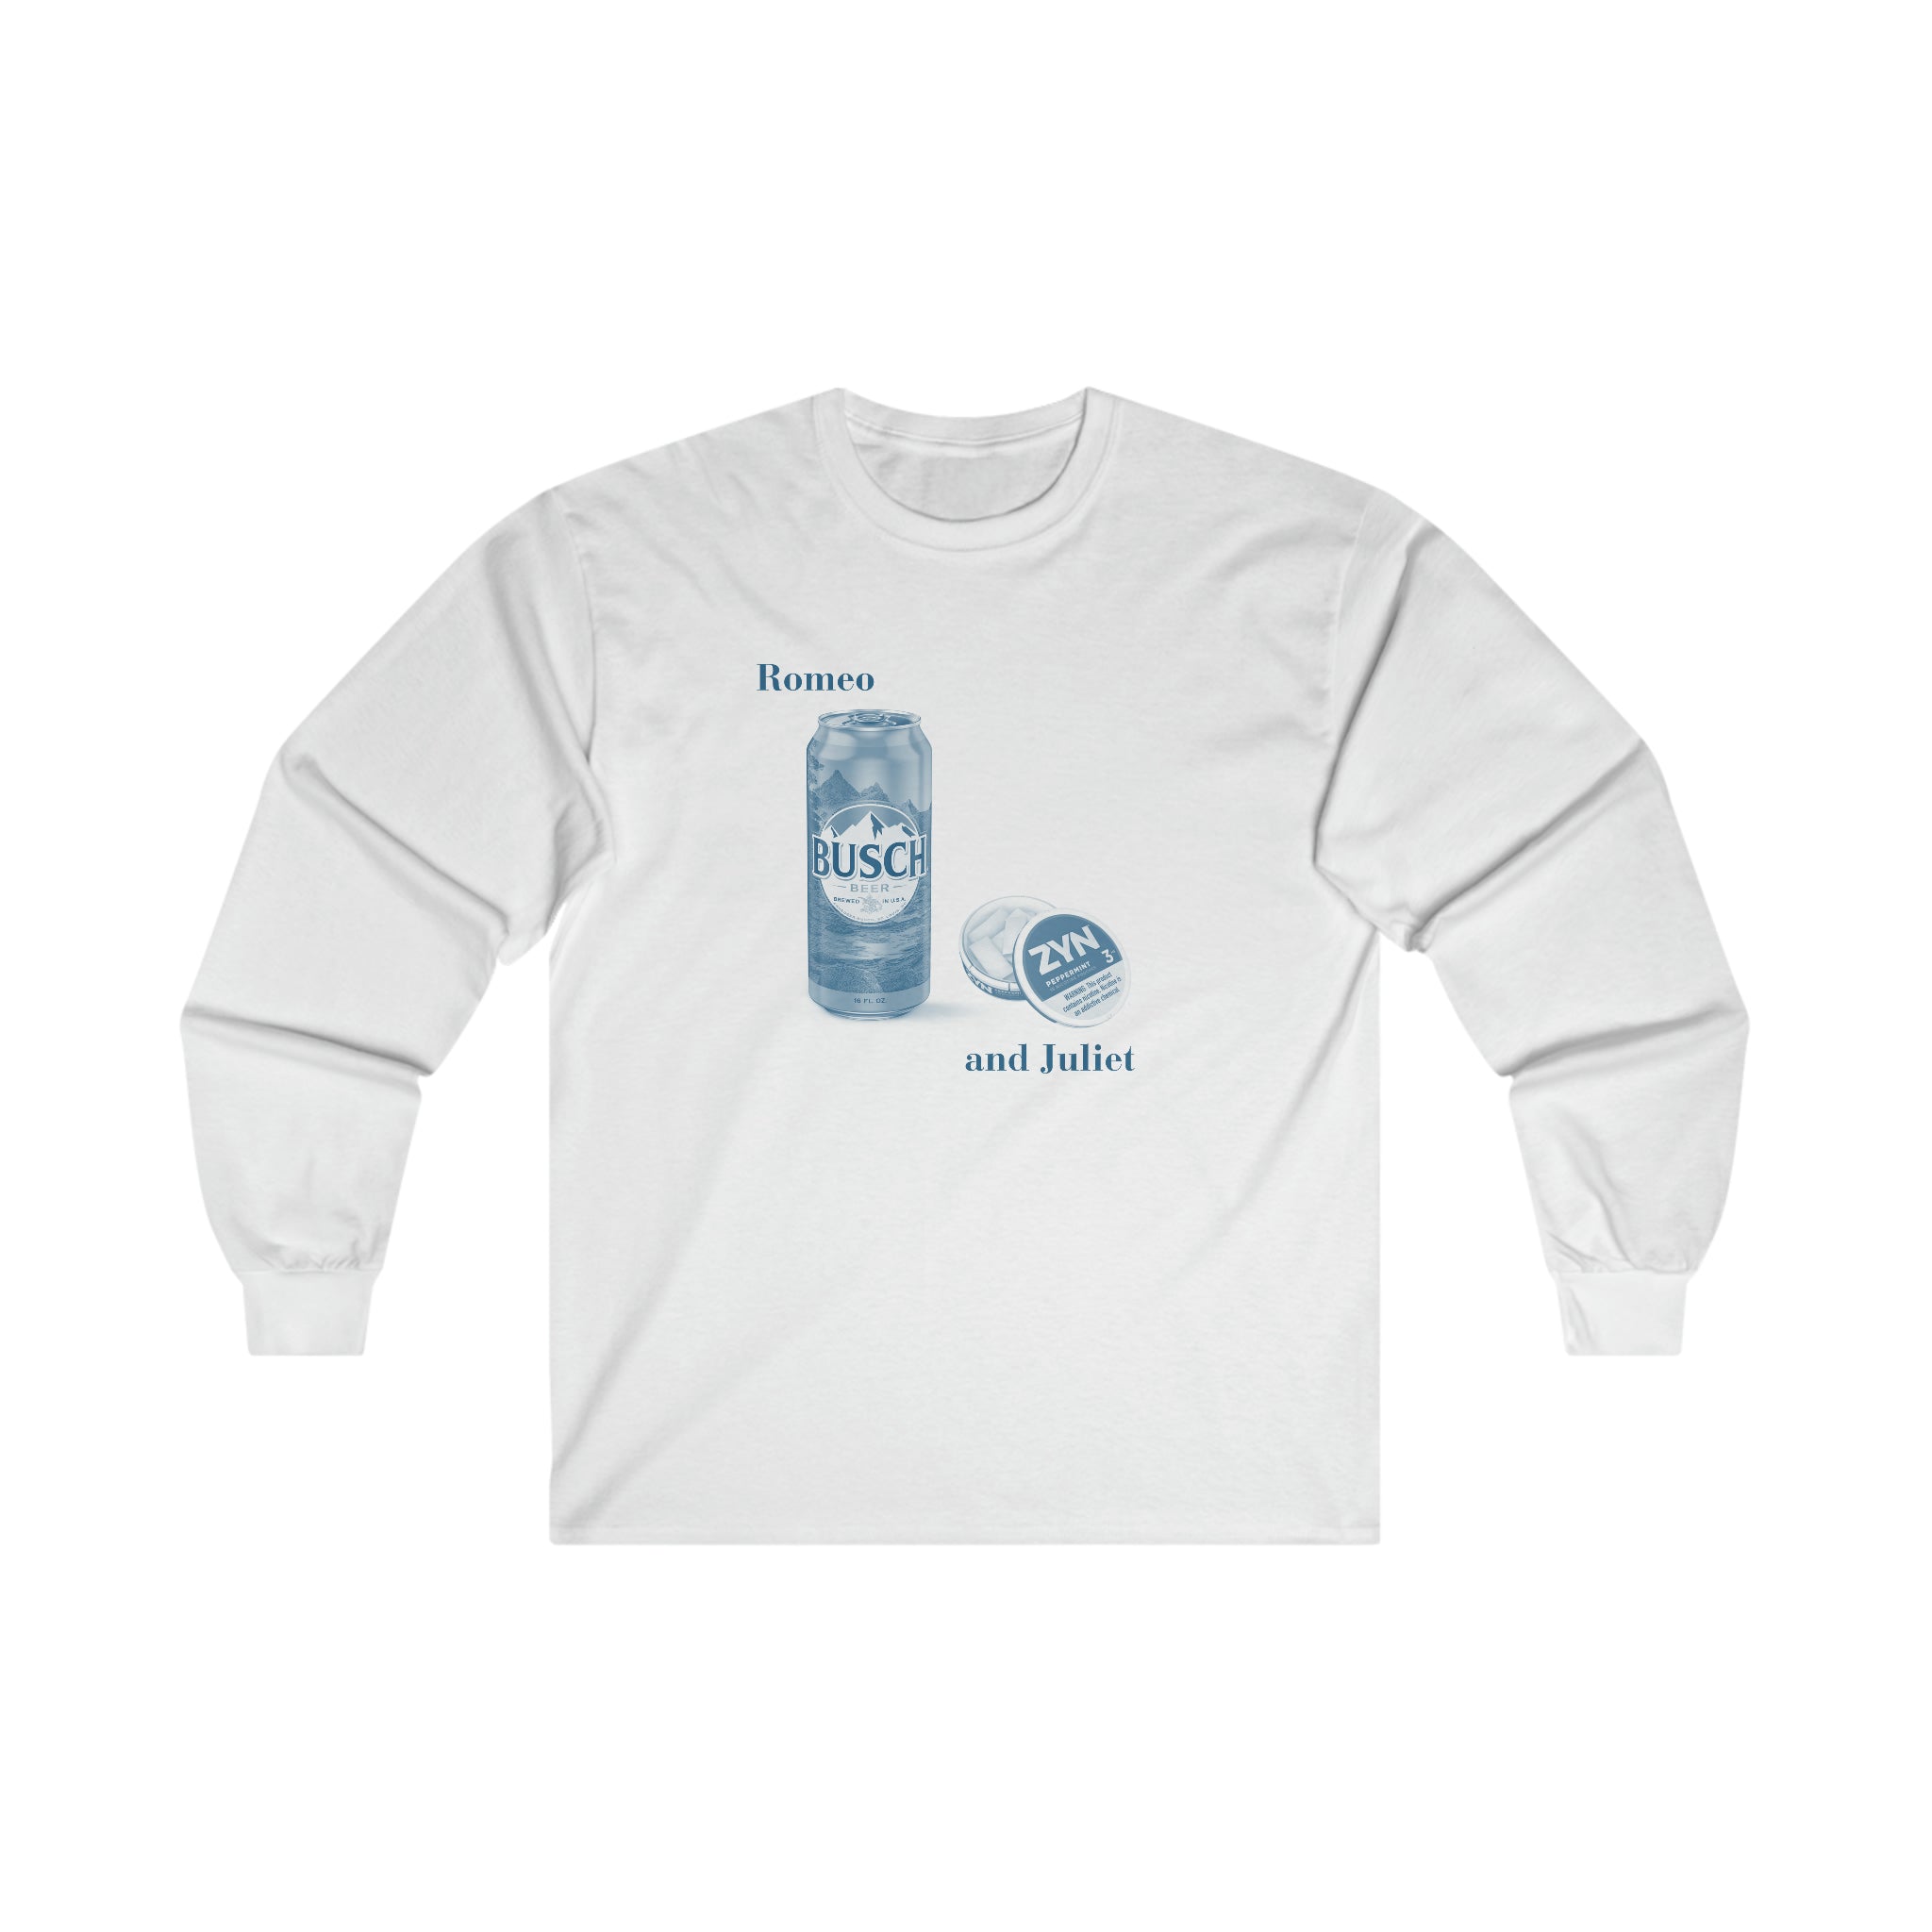 Romeo and Juliet Busch and Zyns - Ultra Cotton Long Sleeve Tee